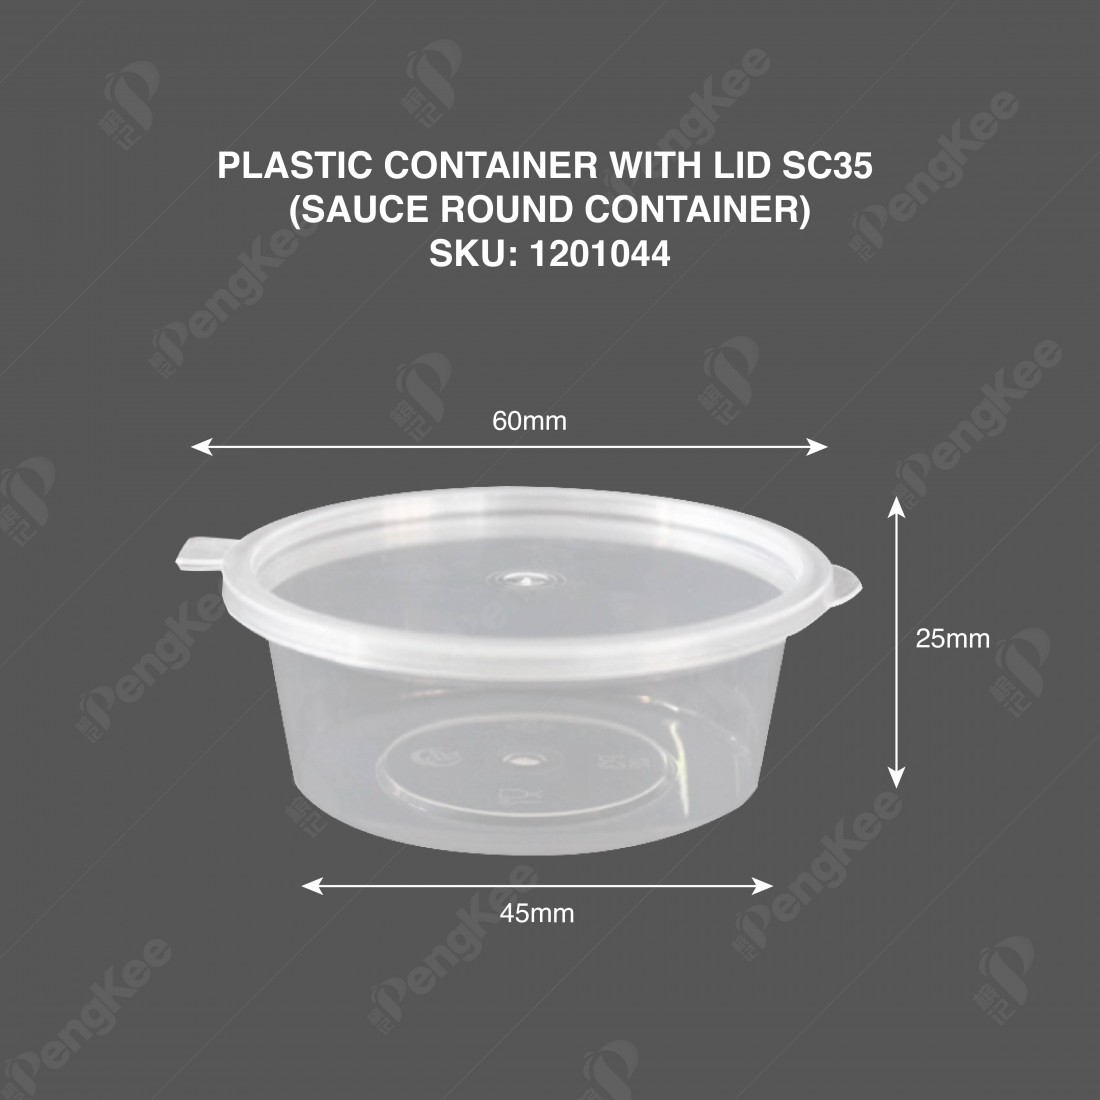 PLASTIC CONTAINER WITH LID SC35 (SAUCE ROUND CONTAINER)